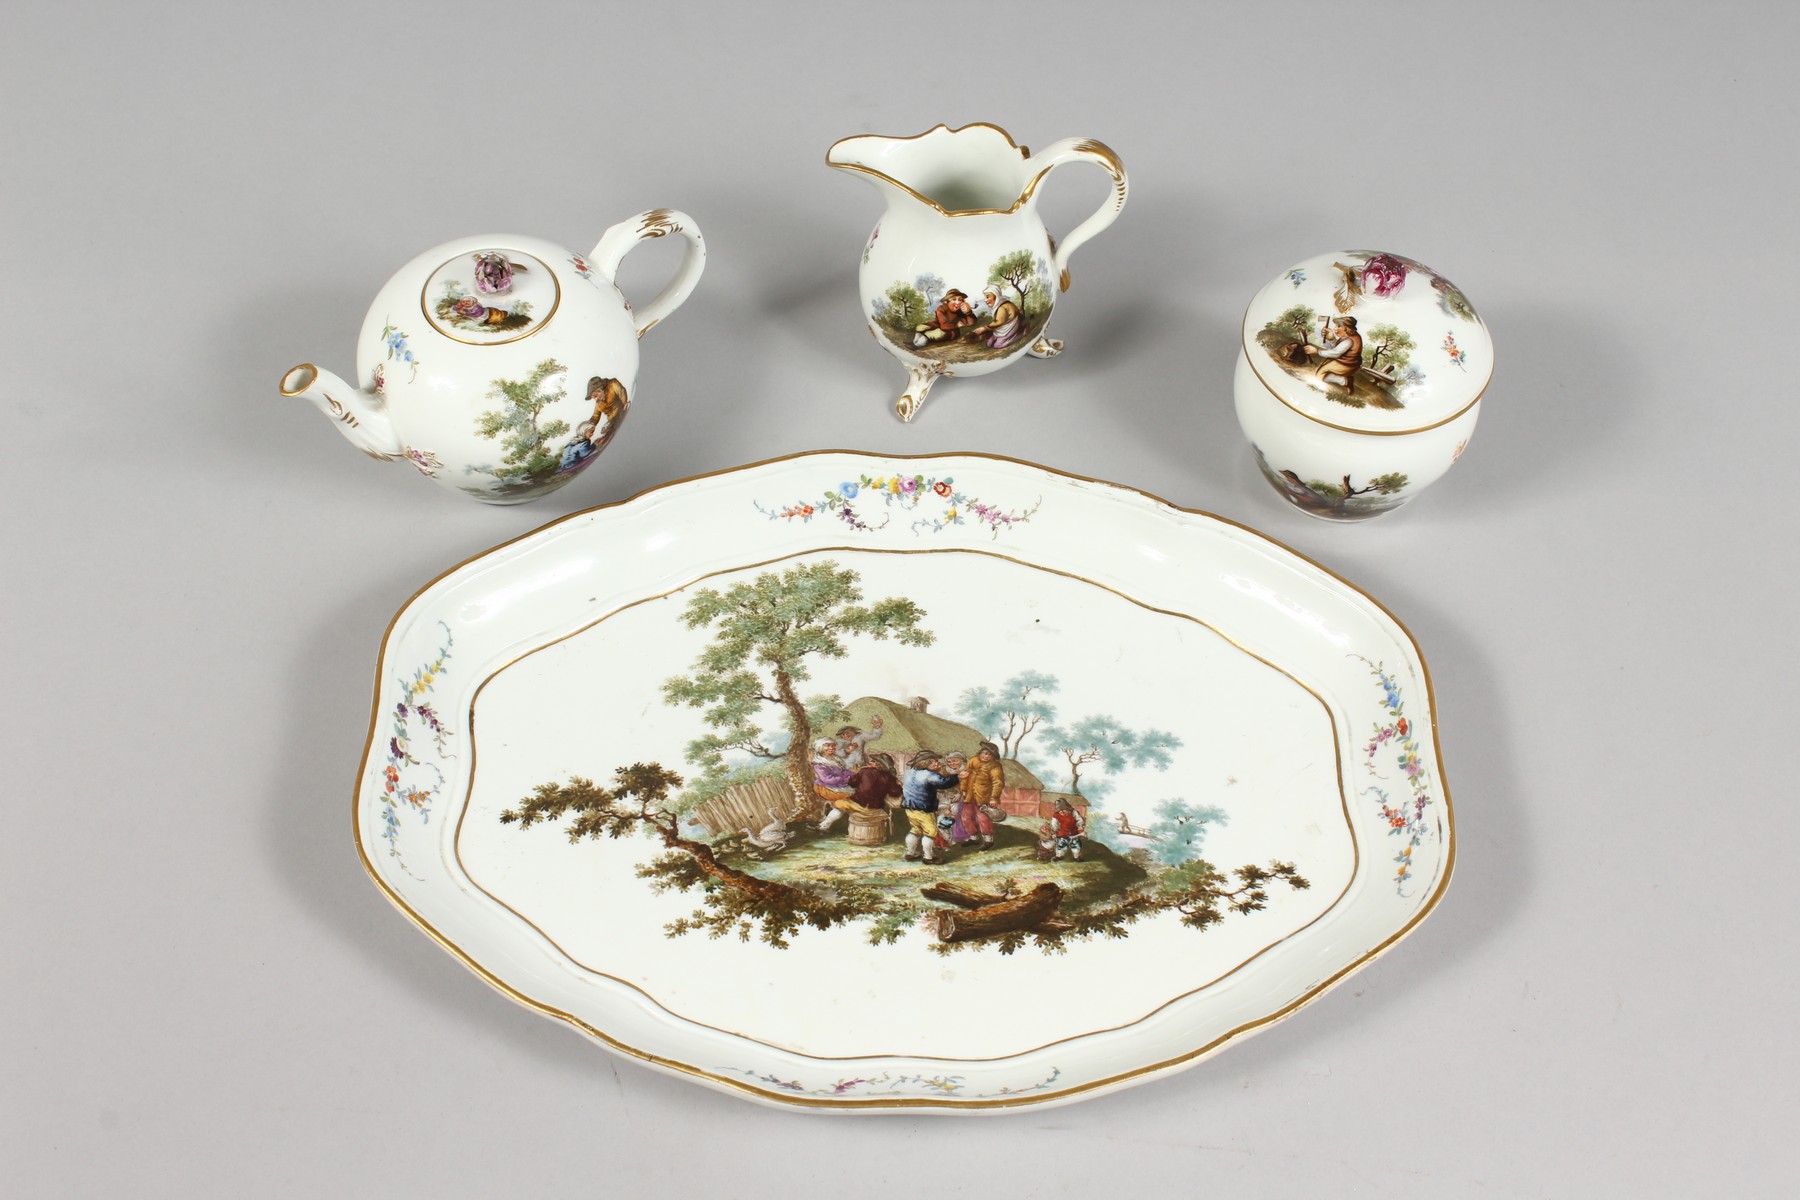 A SUPERB 18TH CENTURY MEISSEN PORCELAIN FOUR PIECE CABARET SET, with oval tray, teapot and cover, - Image 3 of 15